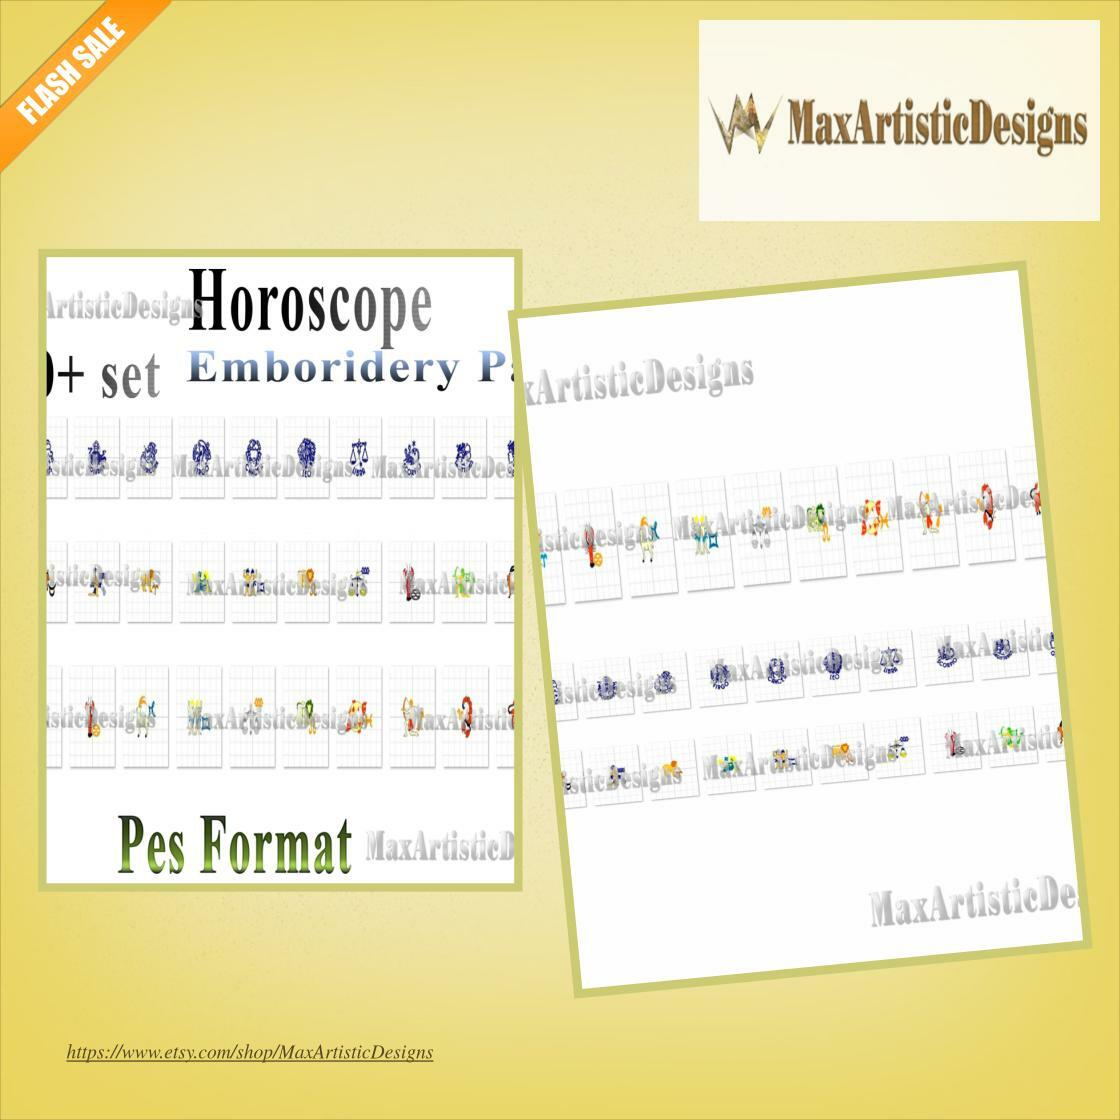 🐕 Big deals! 240+ horoscopes embroidery design signs for embroidery machining - pes format digital download only at $6.22 on etsy.com/listing/110769… Hurry. #MachineEmbroidery #EmbroideryPatterns